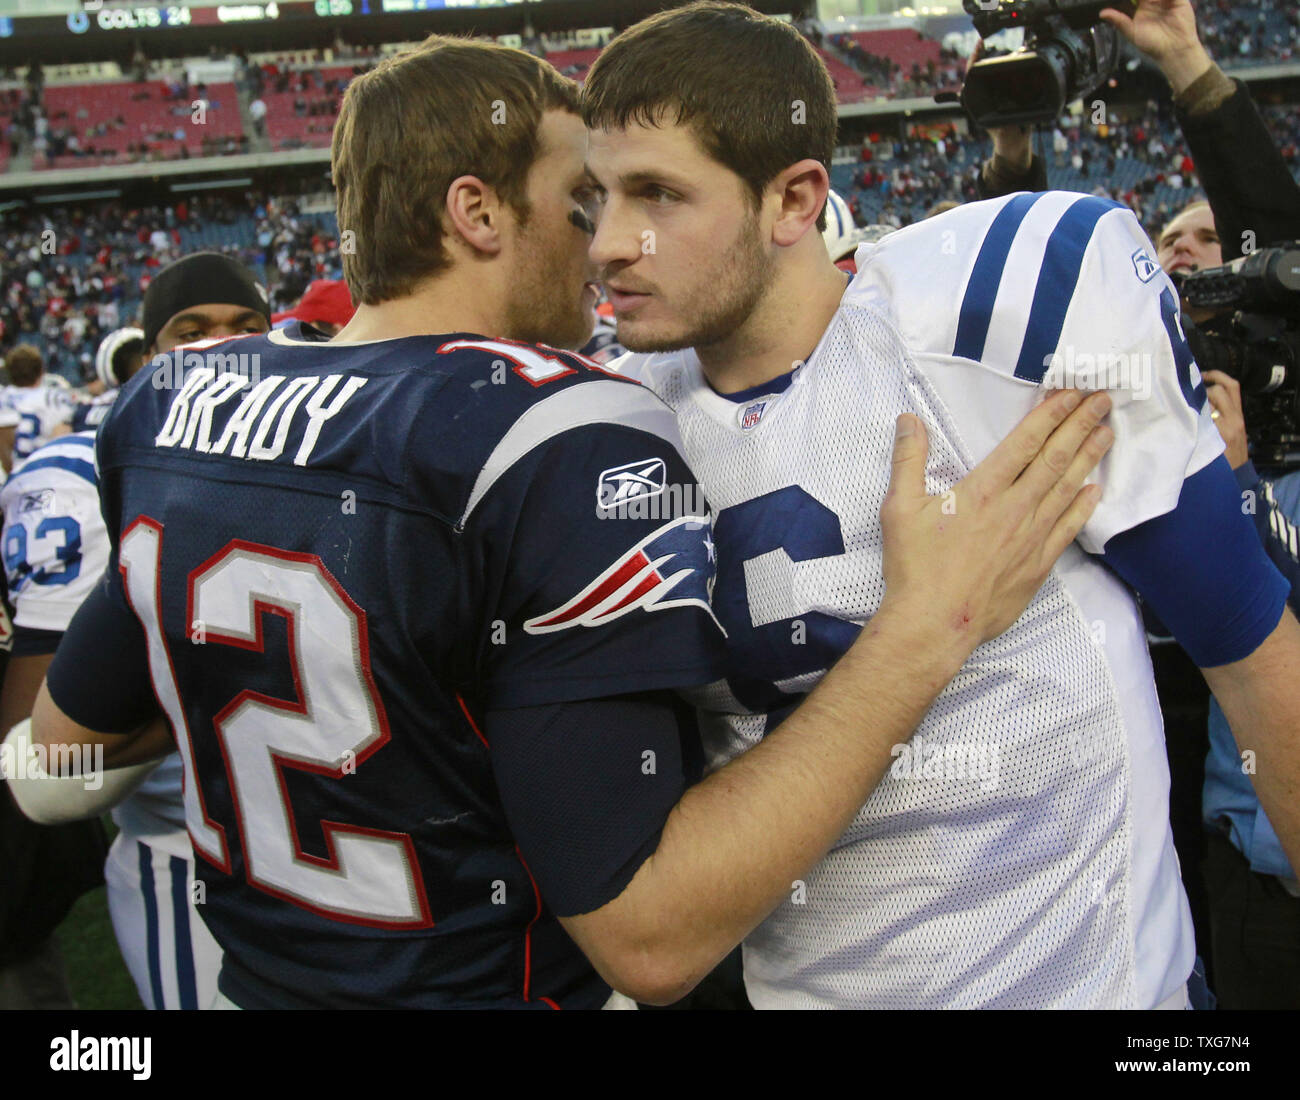 New England Patriots quarterback Tom Brady (12) hugs Indianapolis Colts quarterback Dan Orlovsky (6) after the game at Gillette Stadium in Foxboro, Massachusetts on December 4, 2011.  The Patriots defeated the Colts UPI/Matthew Healey Stock Photo